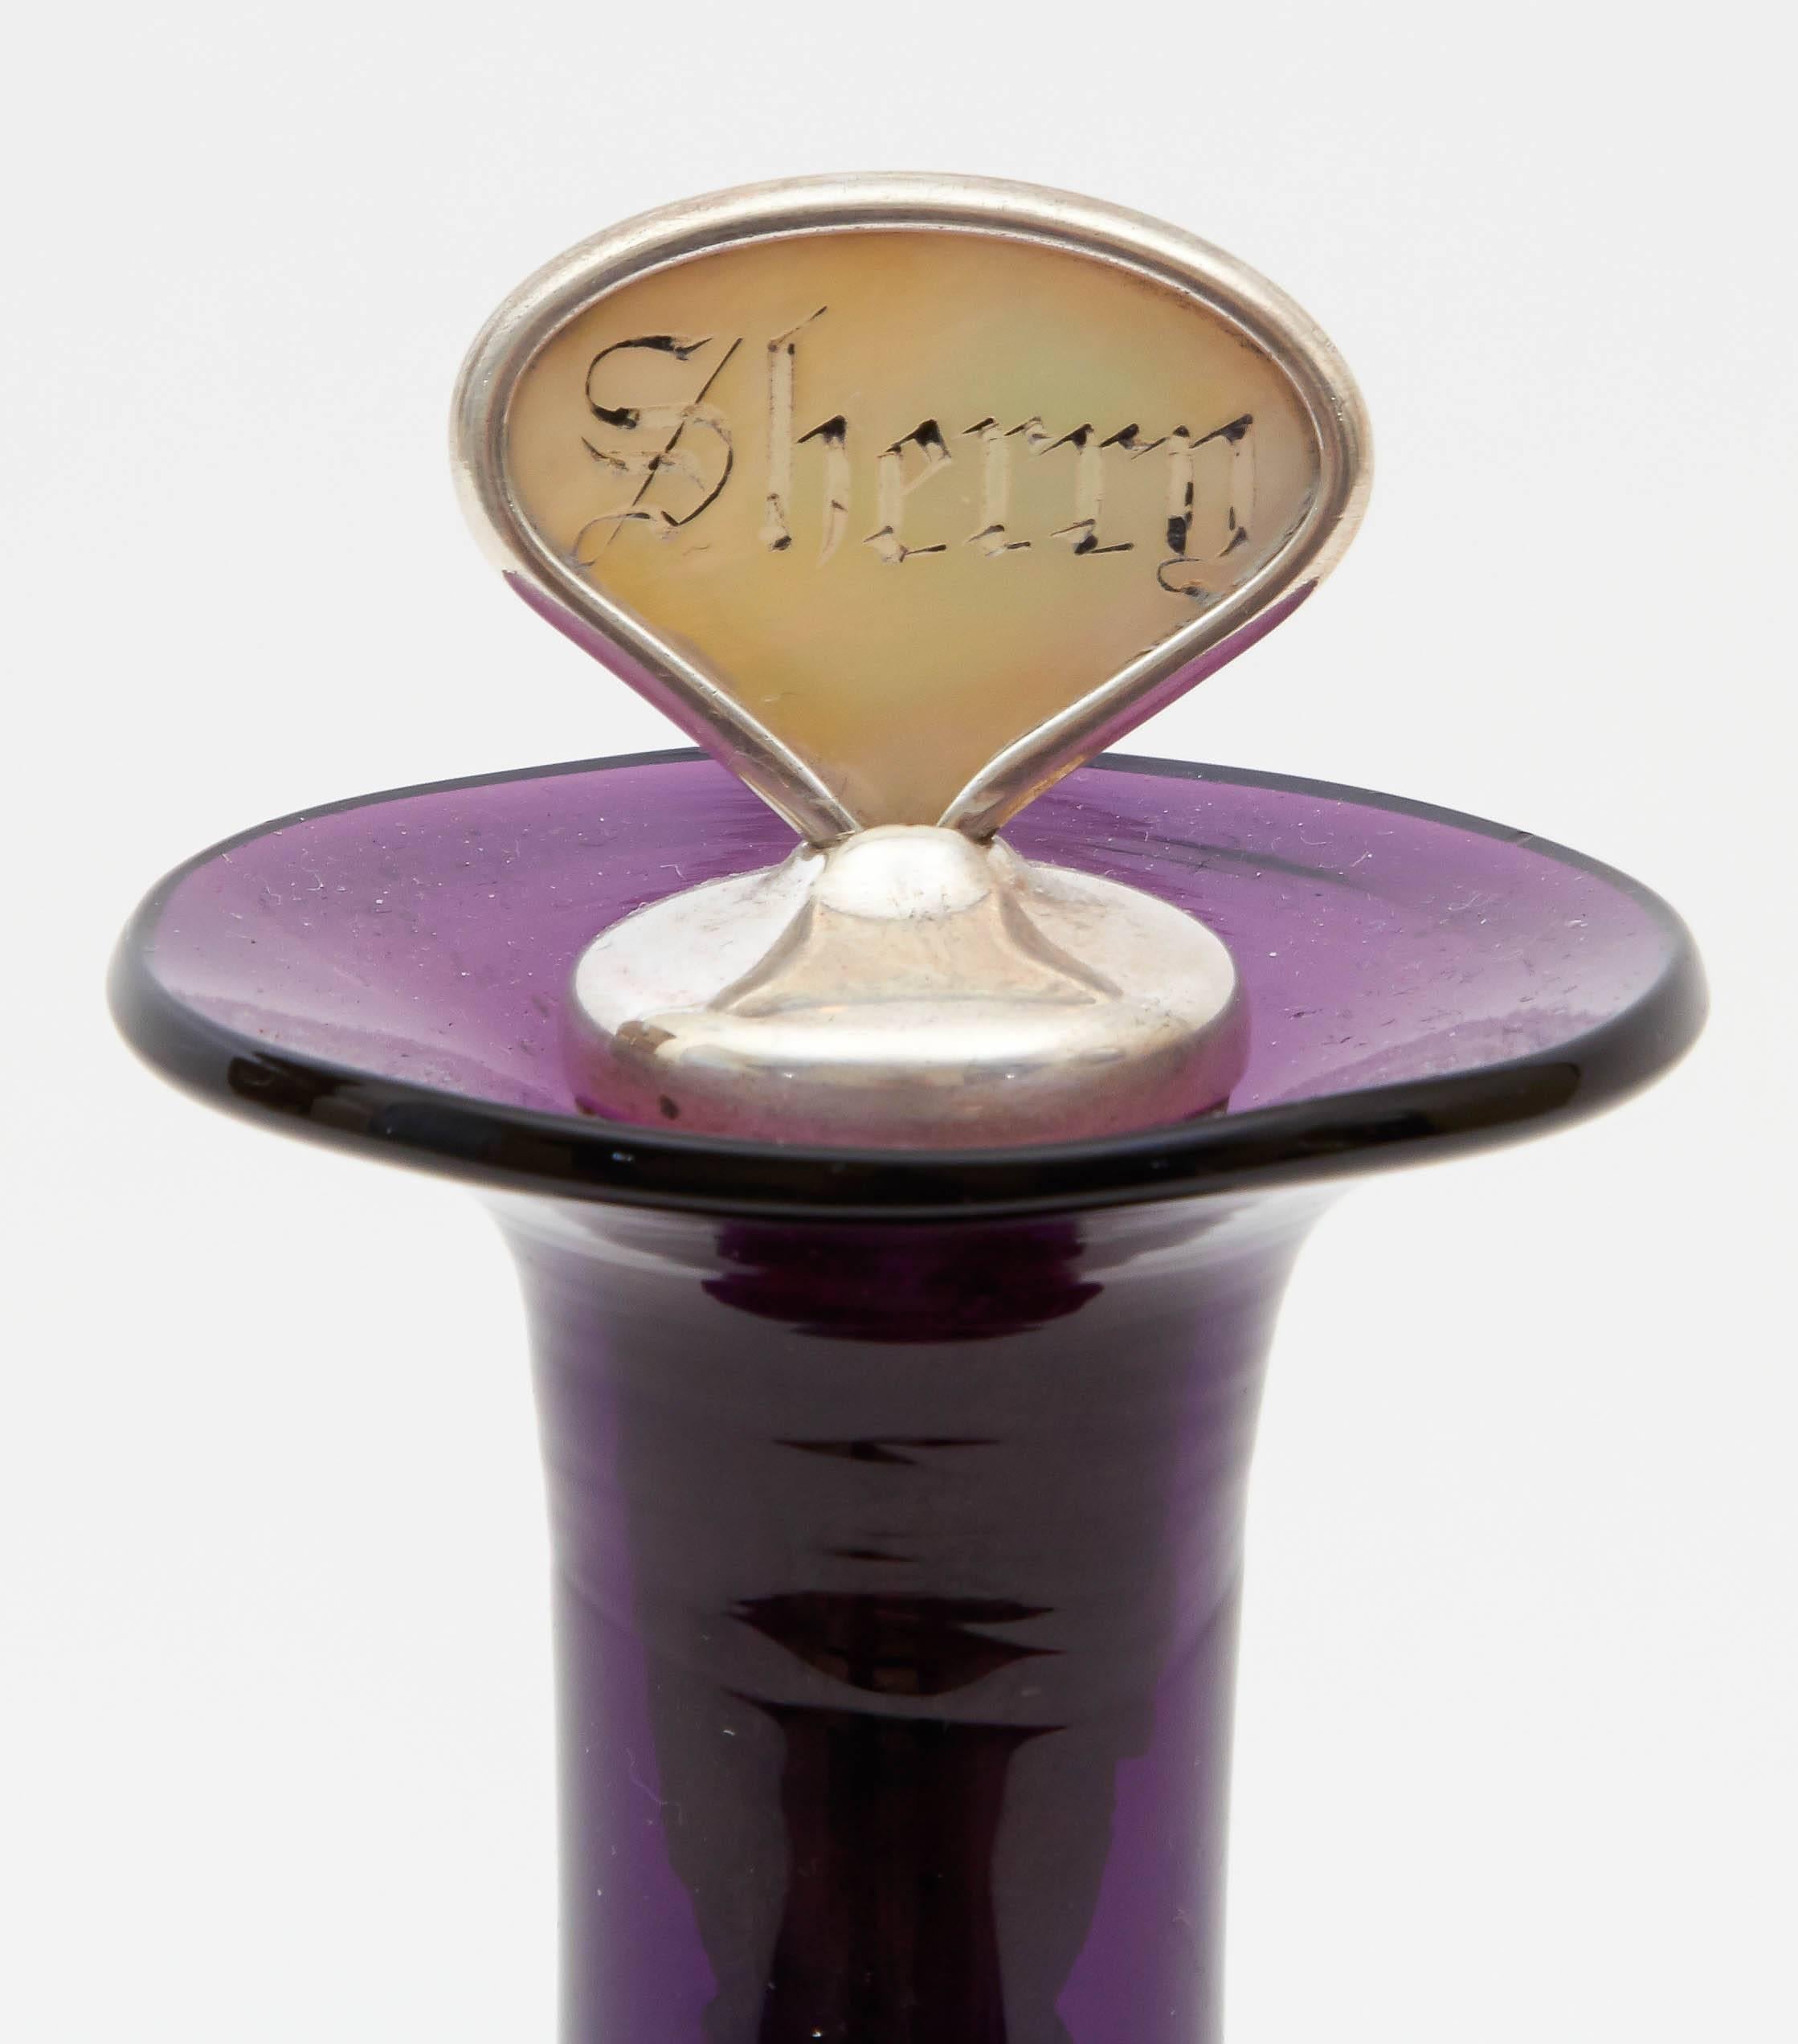 Antique English decanter from the 1860s. Regal purple glass brings elegance to any entertaining event. The decanter includes a Sherry sterling top.